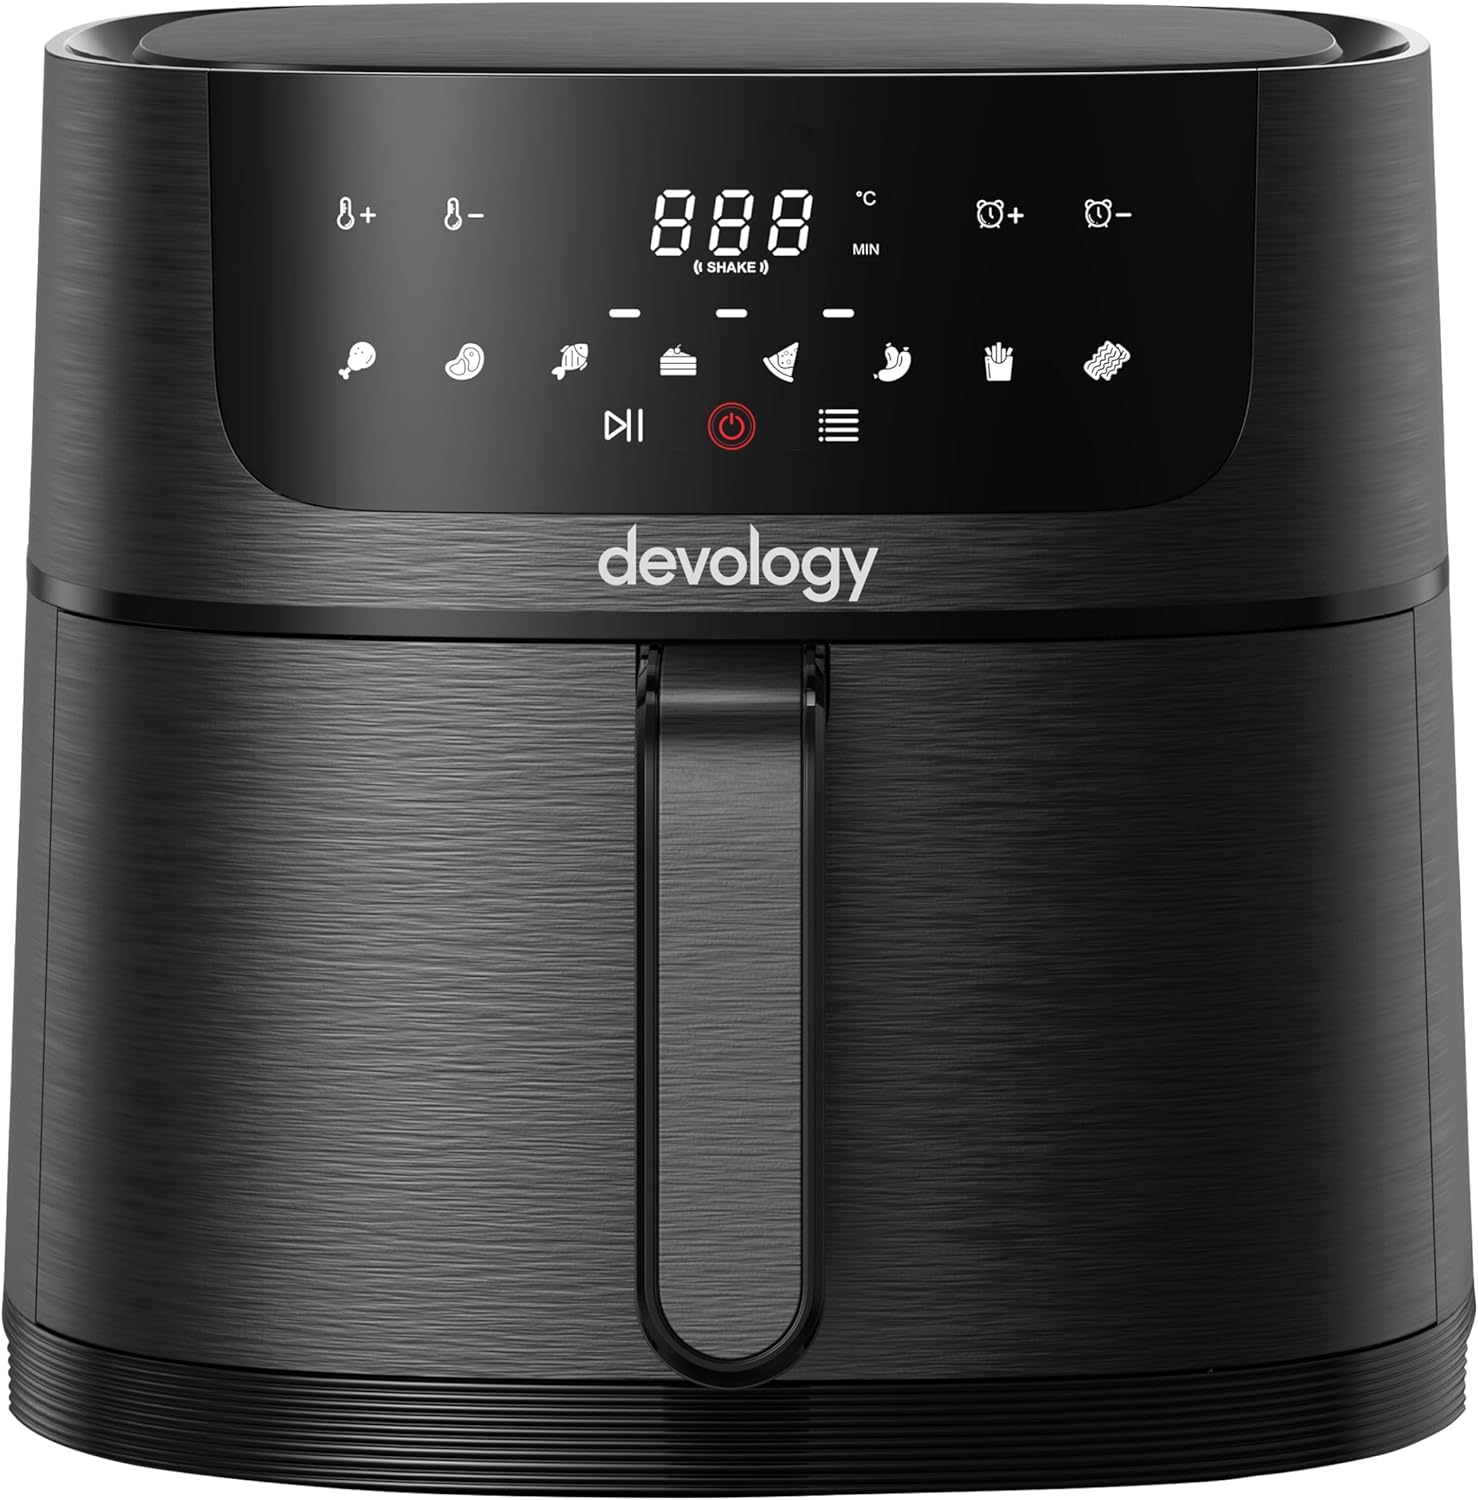 You are currently viewing Devology Air Fryer Review